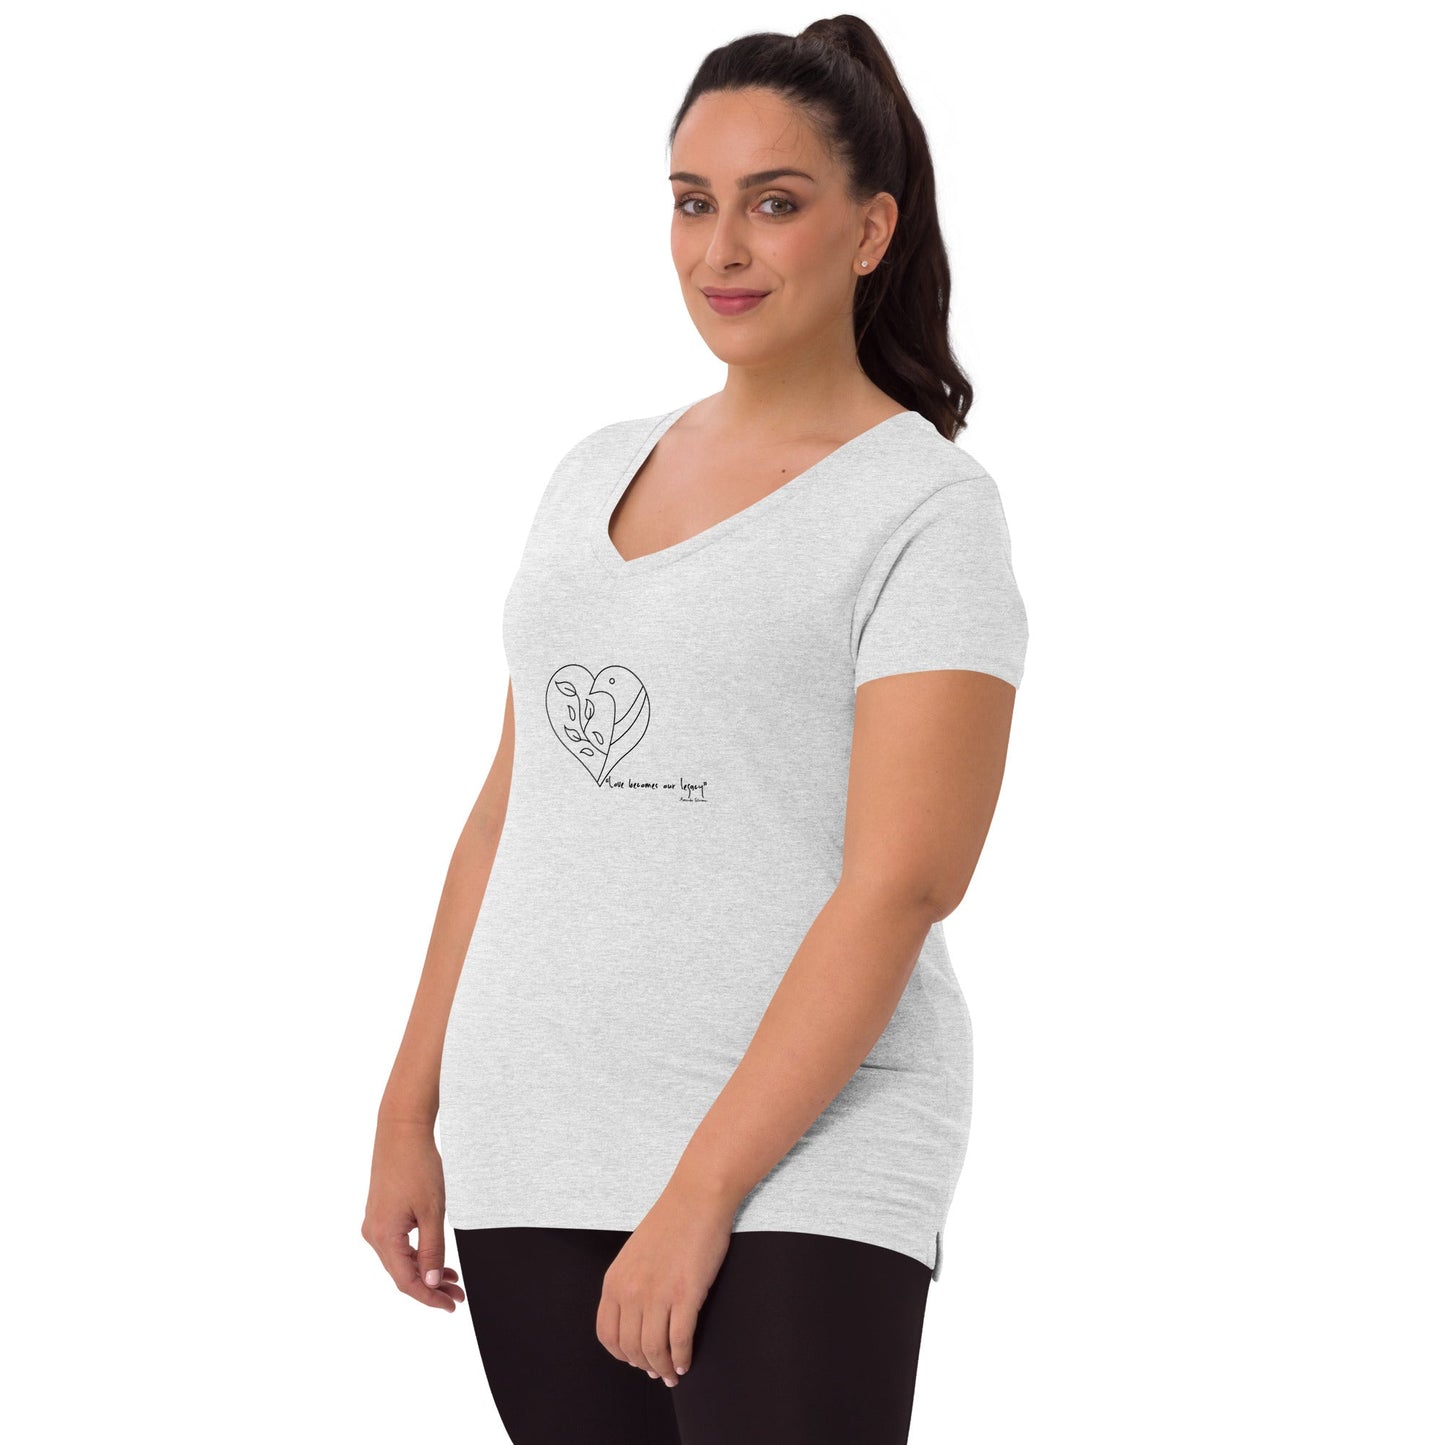 Love becomes our Legacy V-neck - CHYATEE